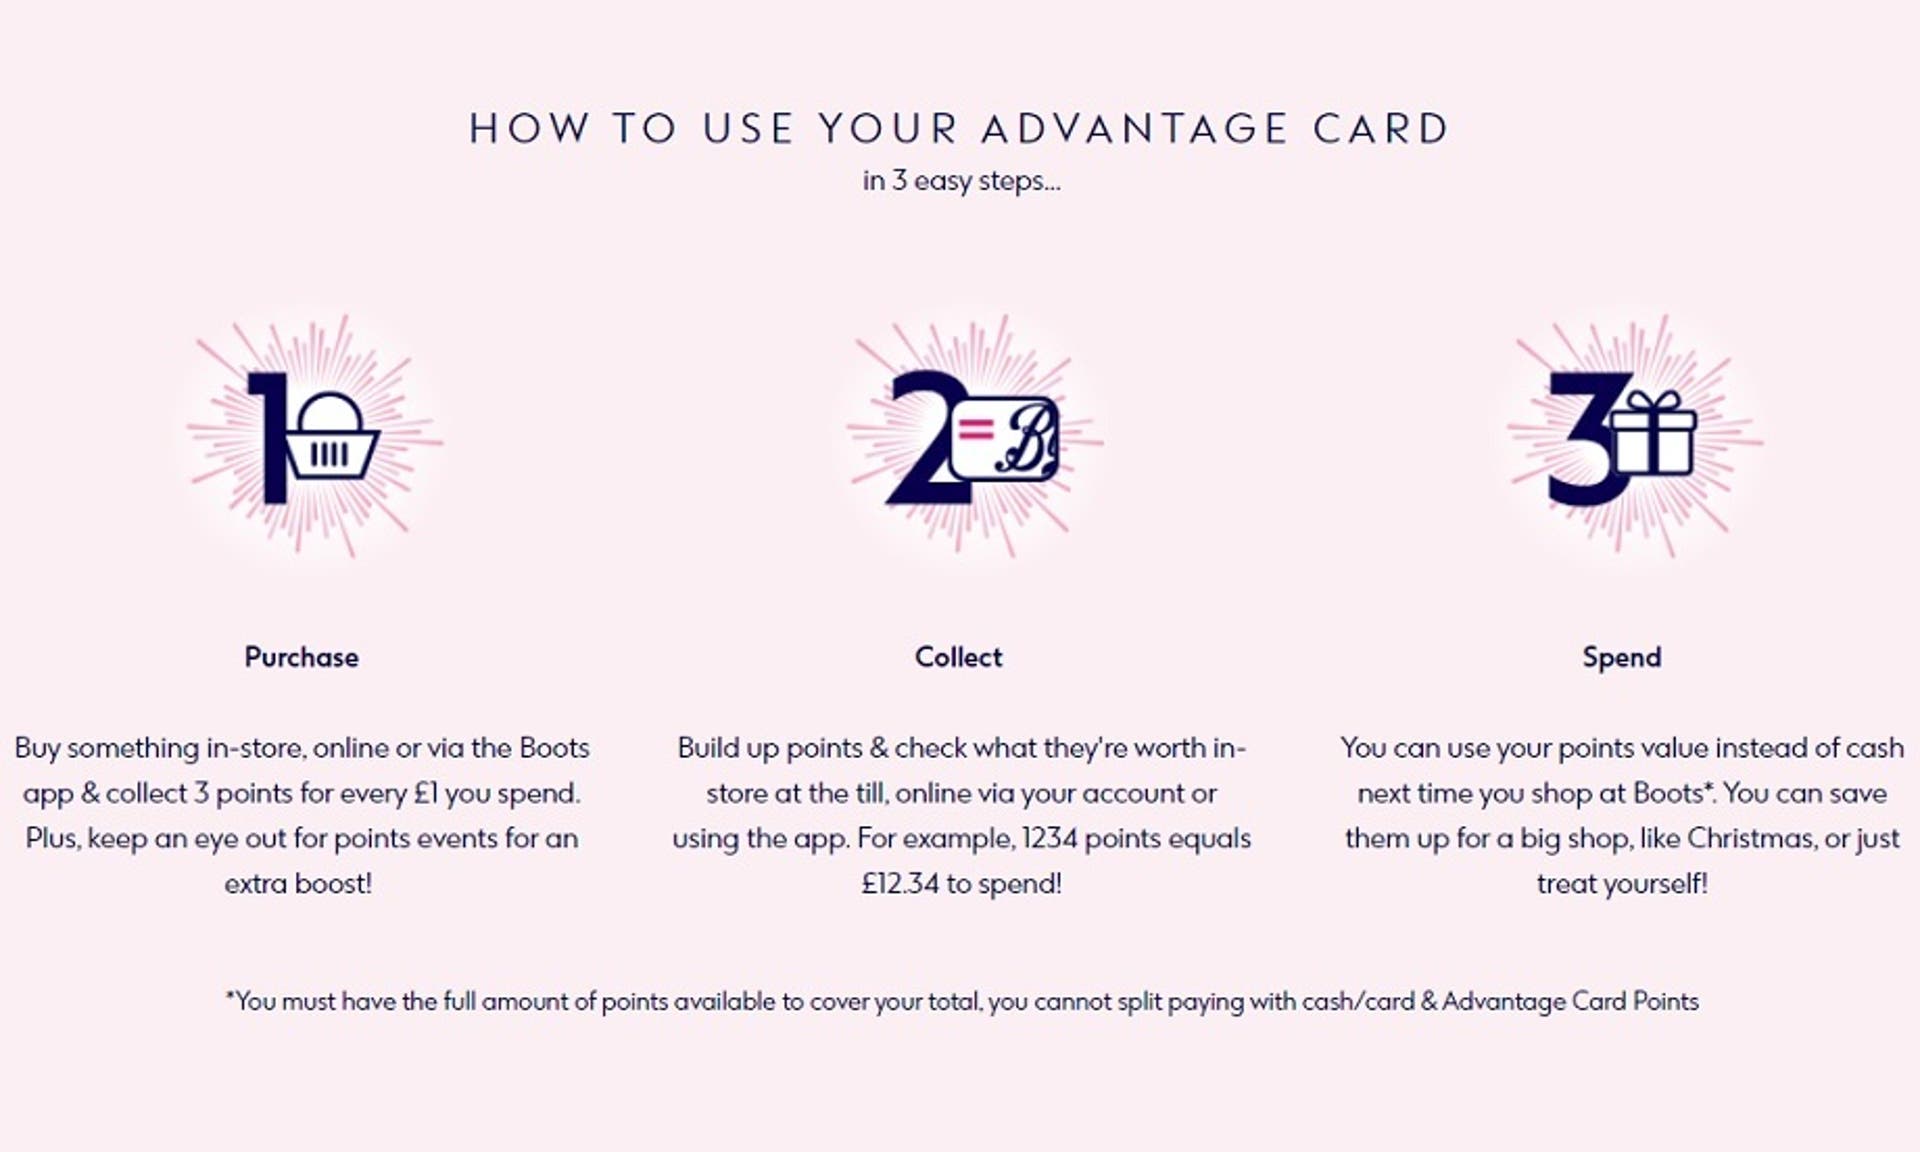  A step by step guide on how to use a Boots Advantage Card. 